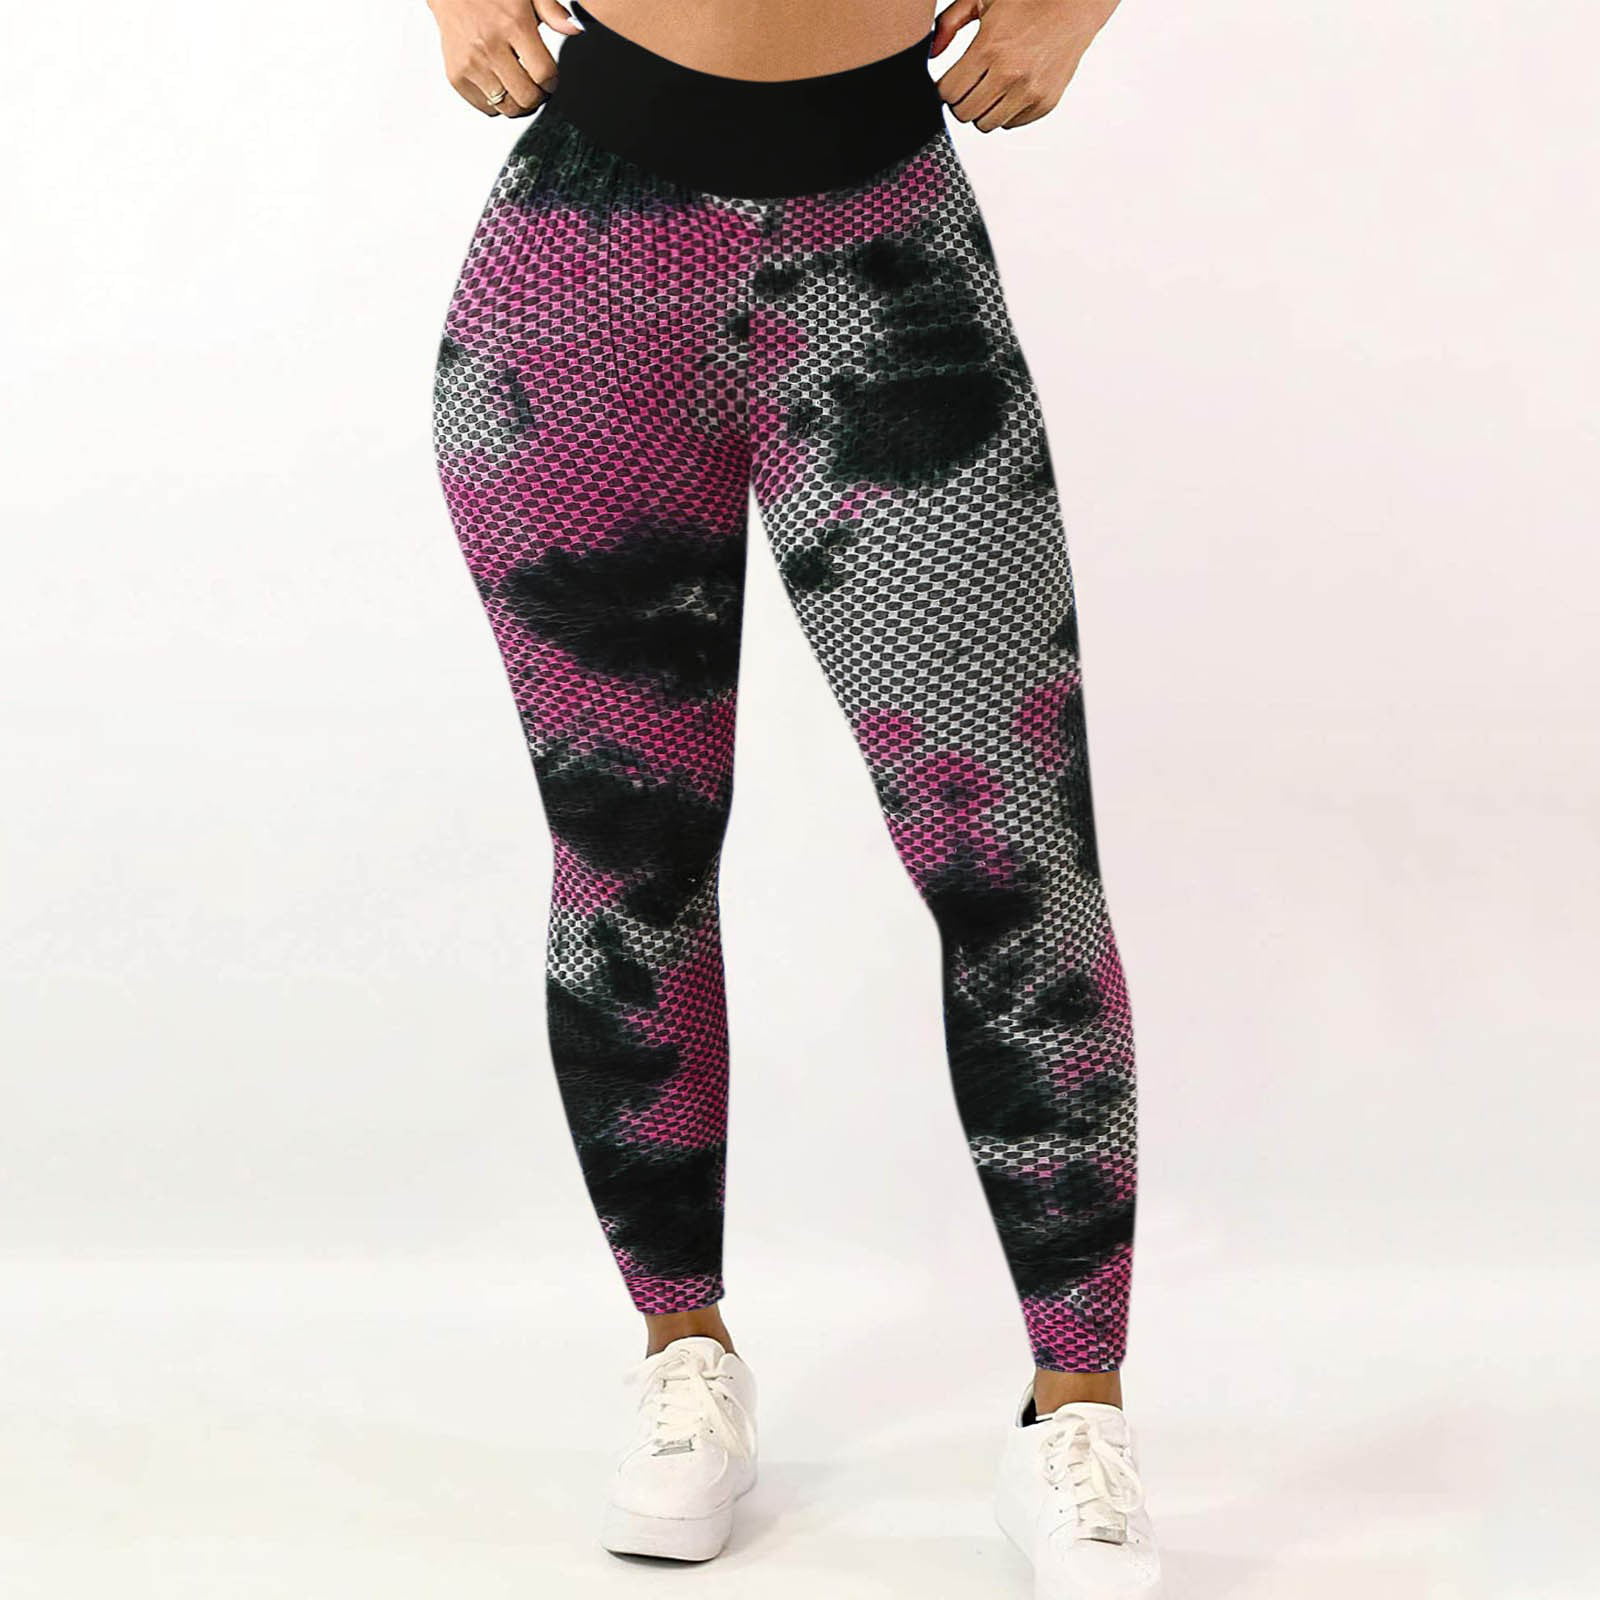 LEEy-World Workout Leggings for Women Mesh Leggings for Women with Unique  Design and Lifting - Womens Workout Leggings for Gym Black,S